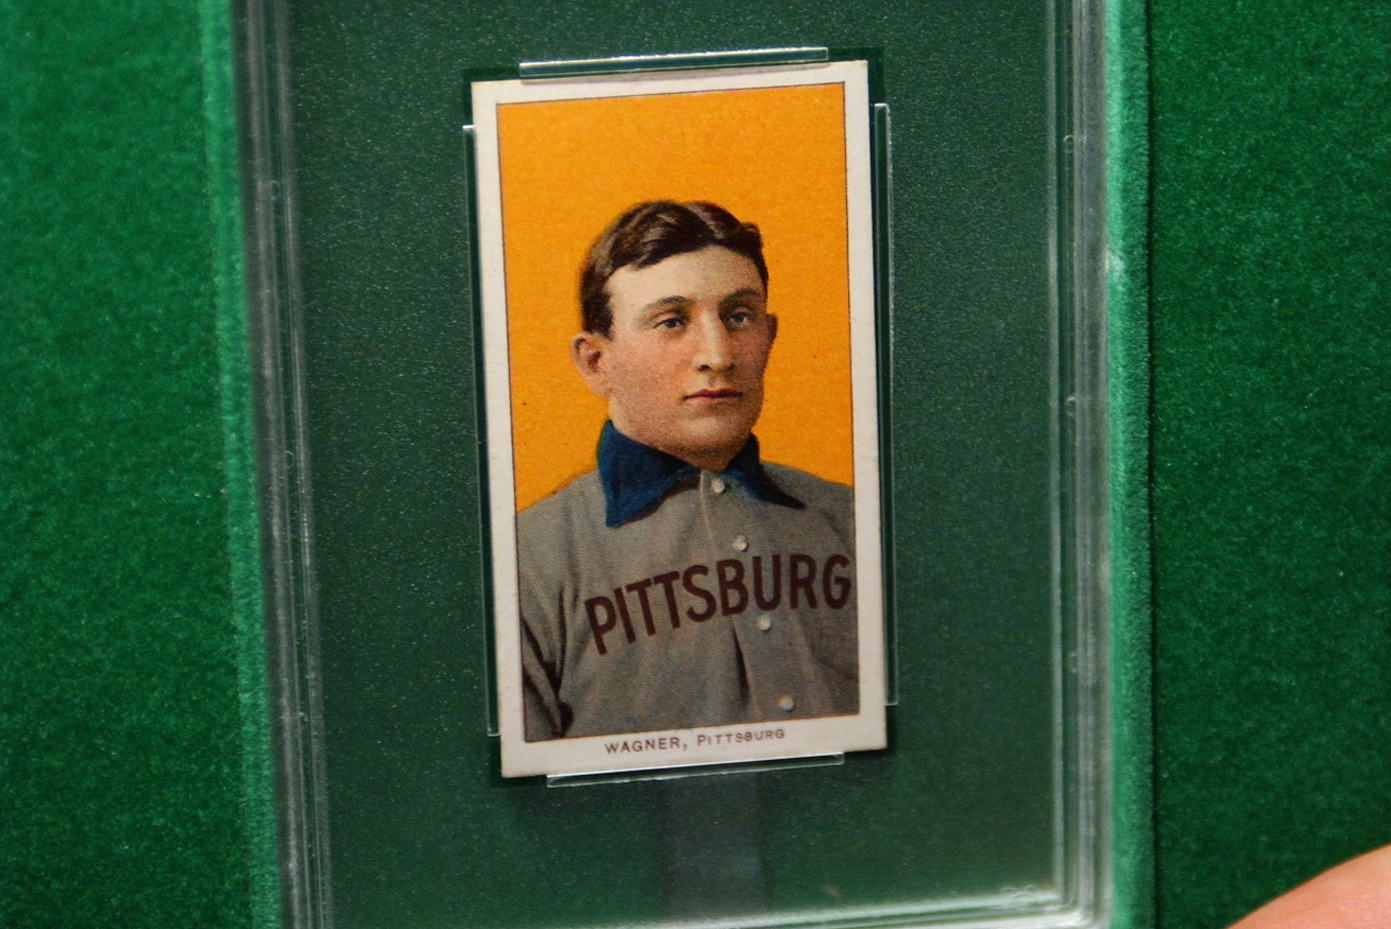 A Honus Wagner T-206 Card Sells for a Record $7.25 Million